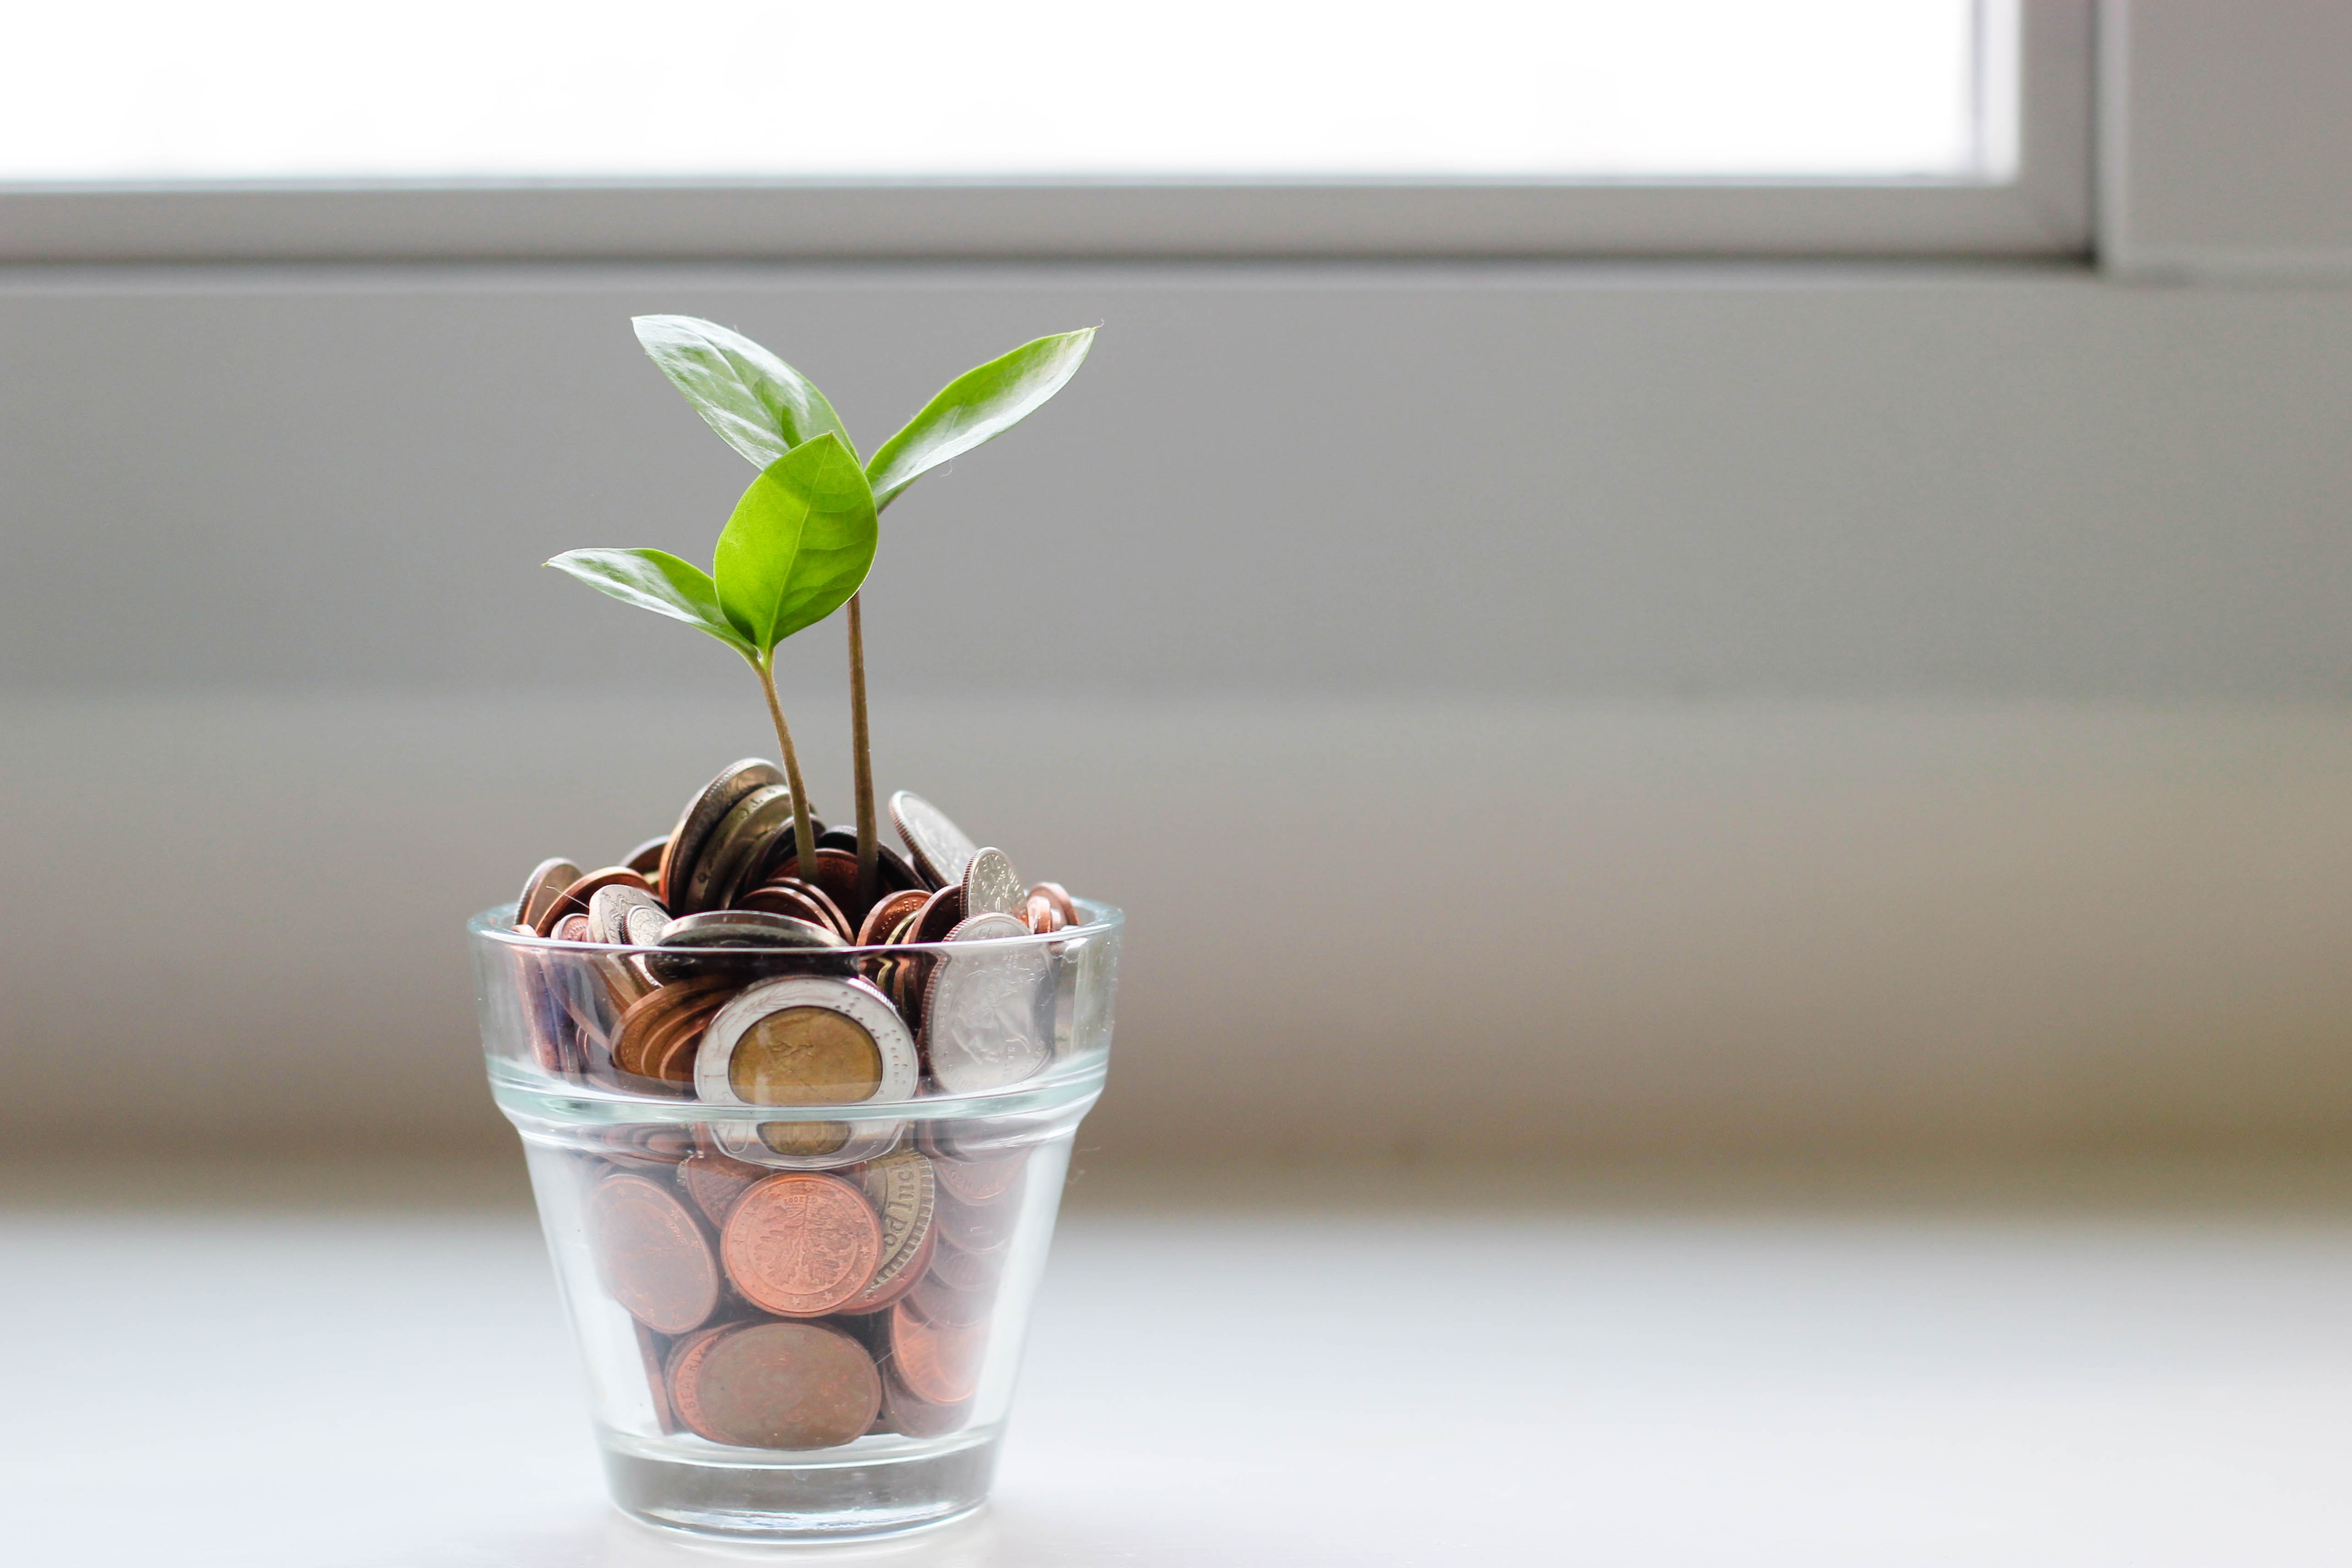 glass full off coins with a small plant growing out